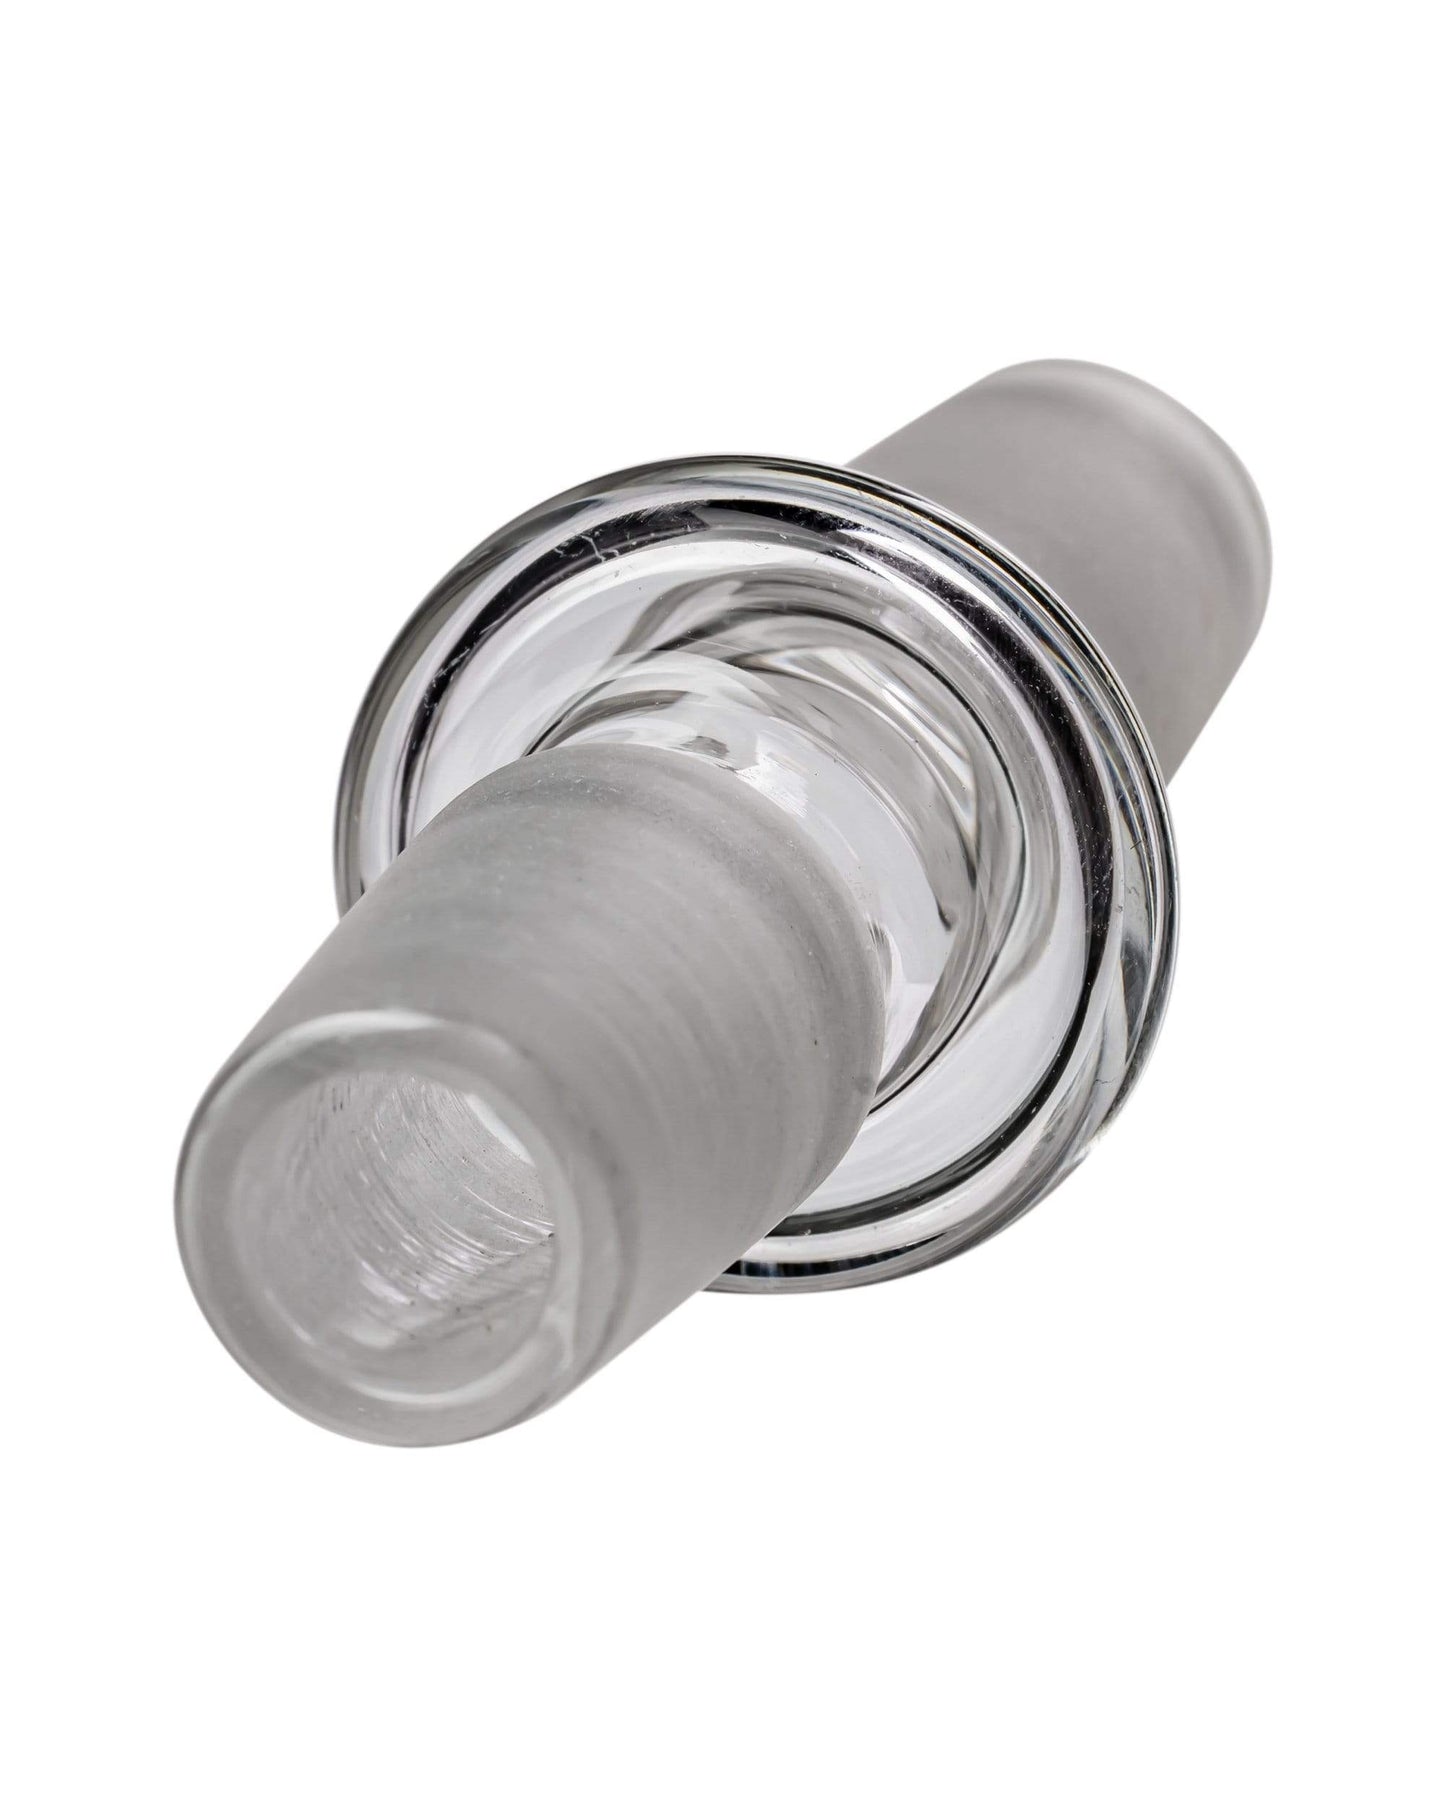 Grav Labs Adapter 14mm Male to 14mm Male Adapter